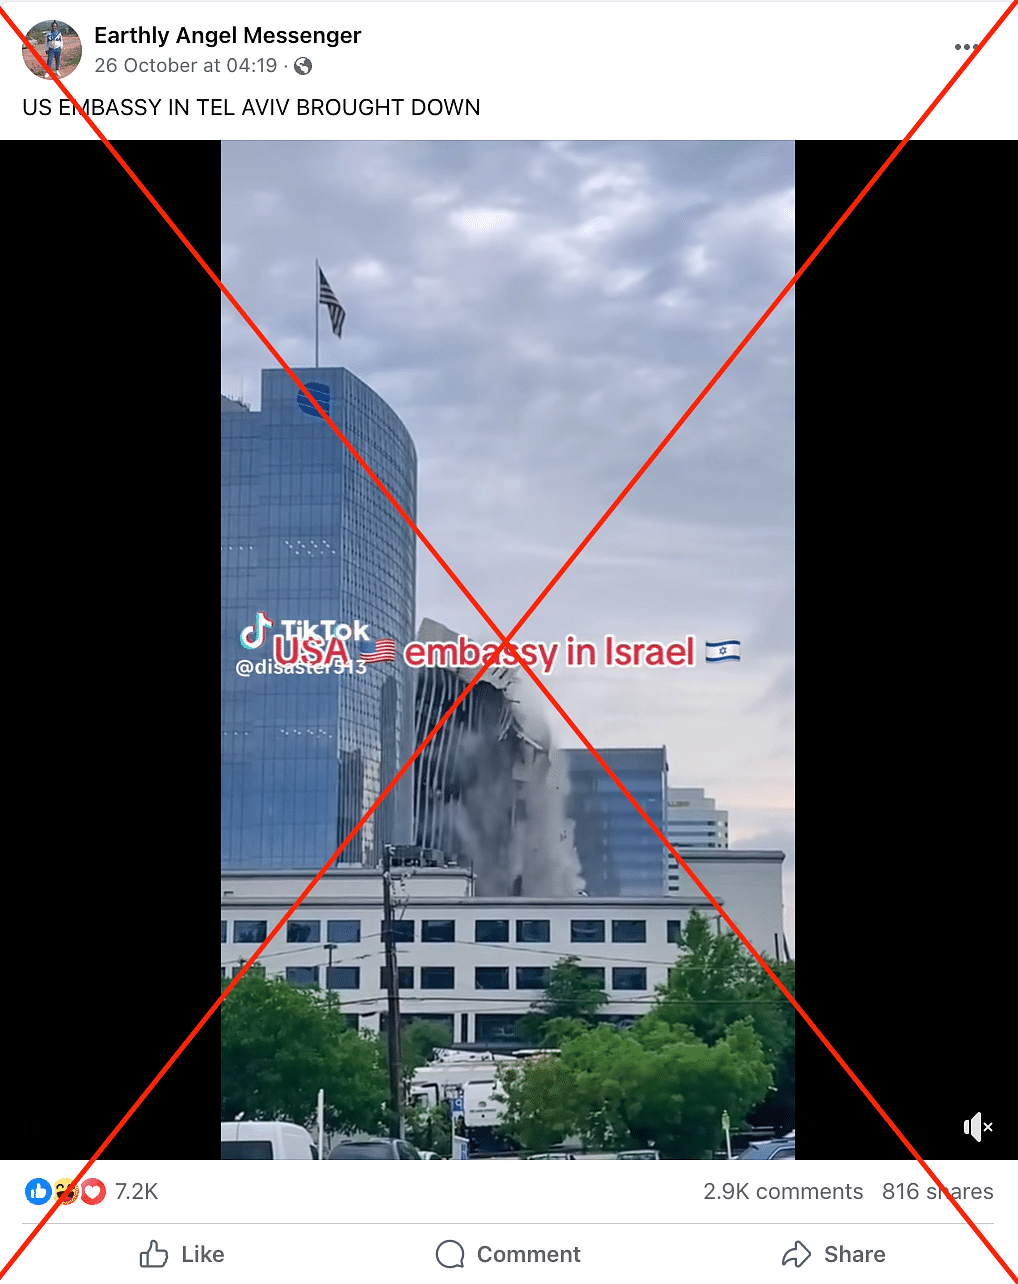 The video dates back to May 2020 and shows an office building being demolished in Virginia, USA.